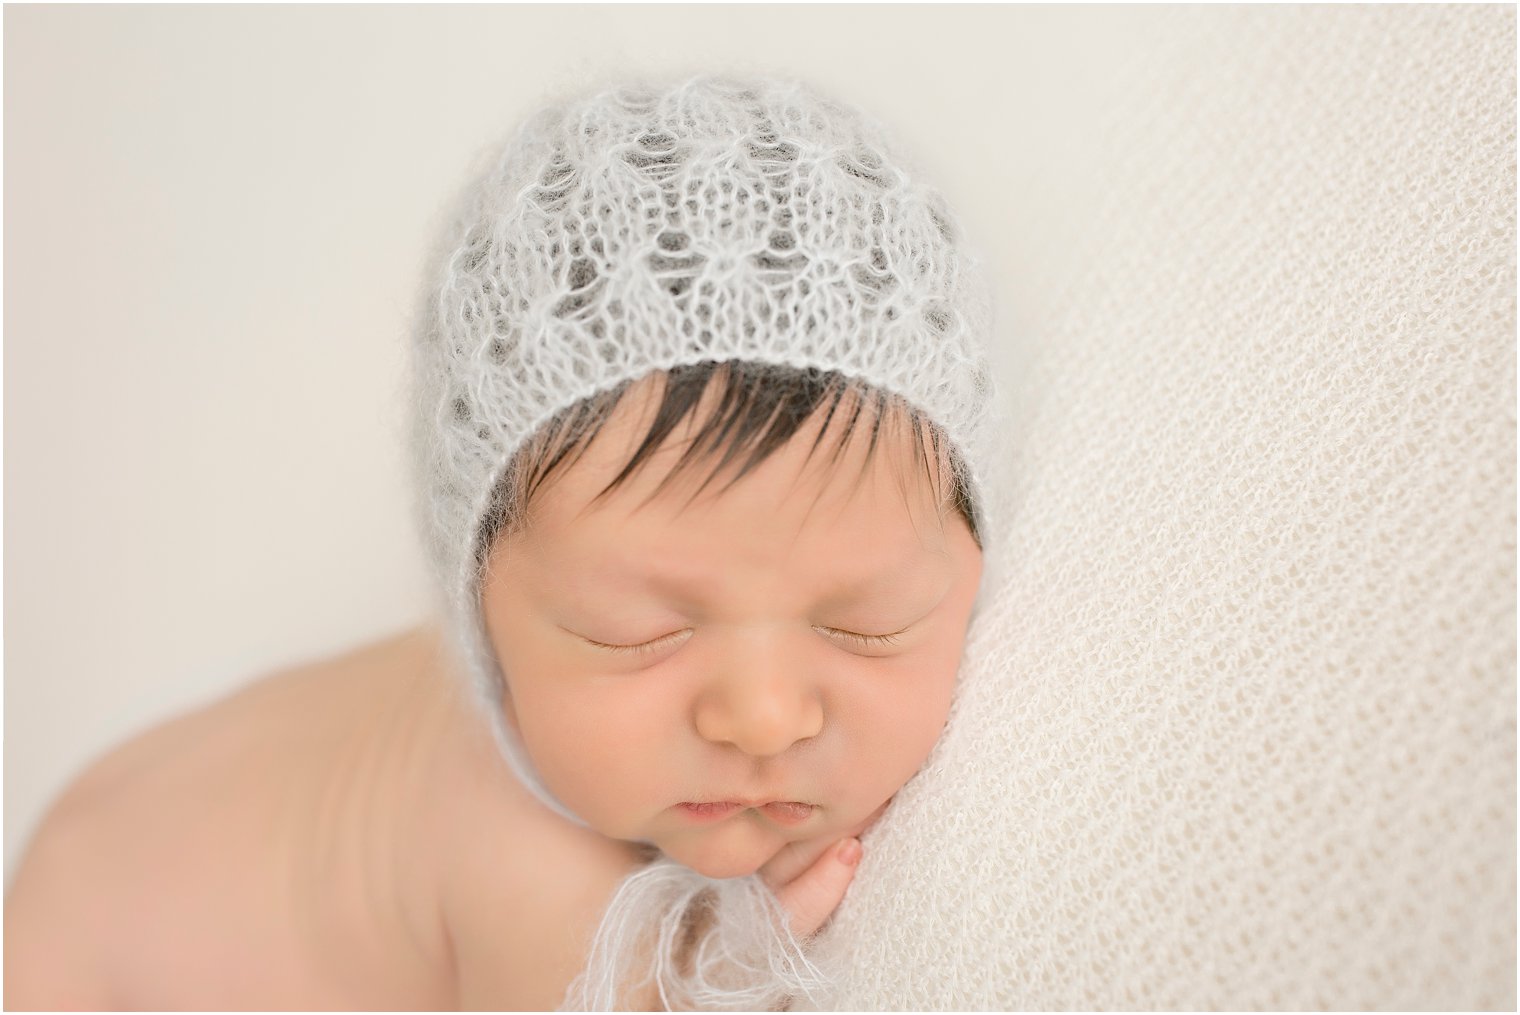 Newborn boy with hat from Blueberry Props